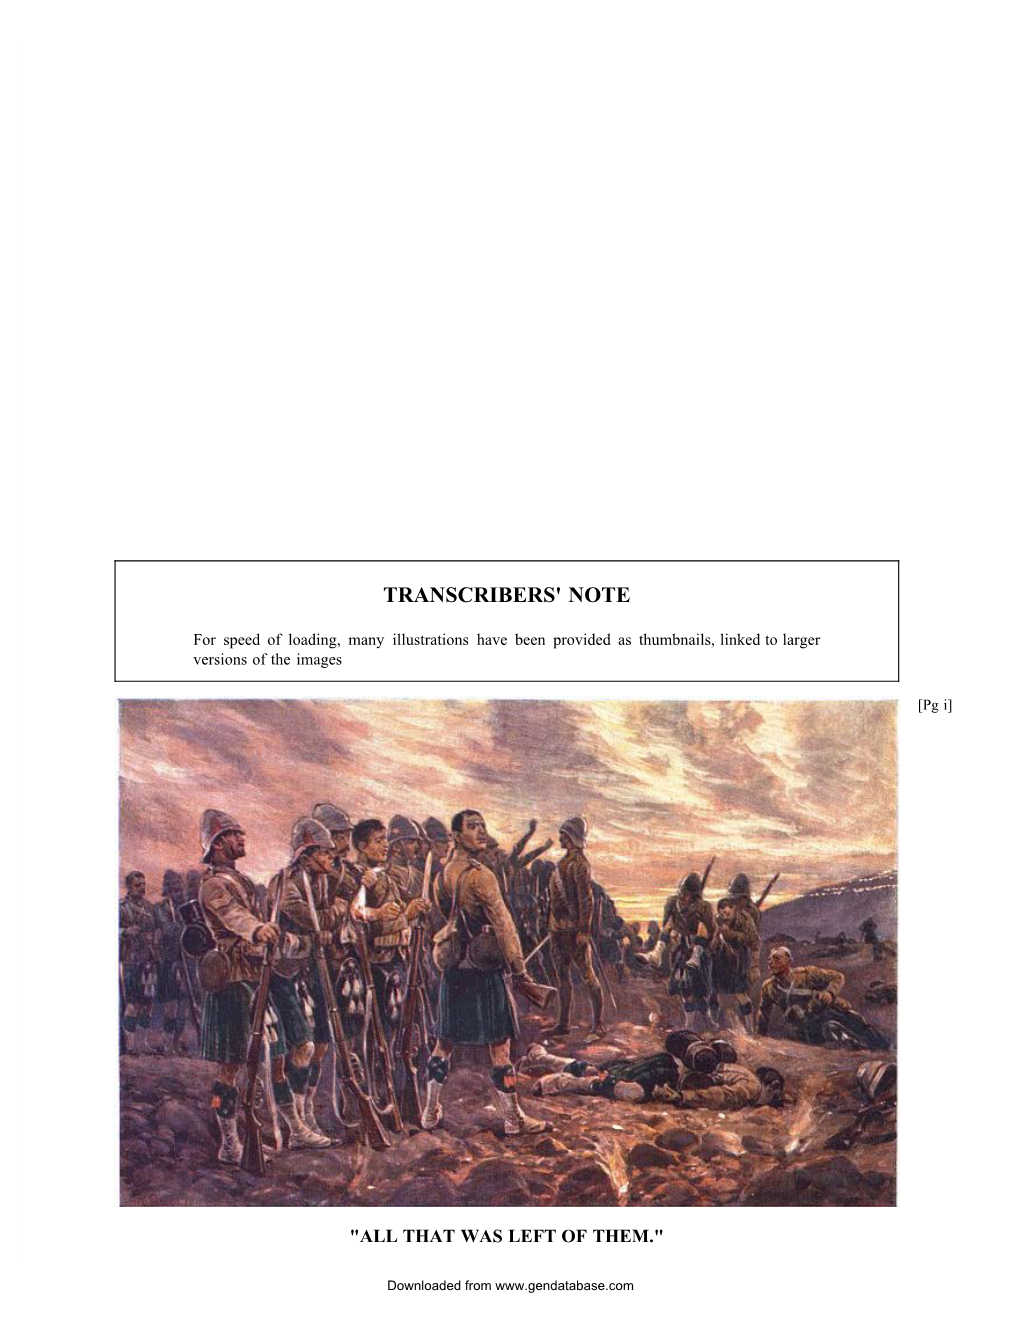 The Project Gutenberg Ebook of South Africa and the Transvaal War Vol. II. by Louis Creswicke